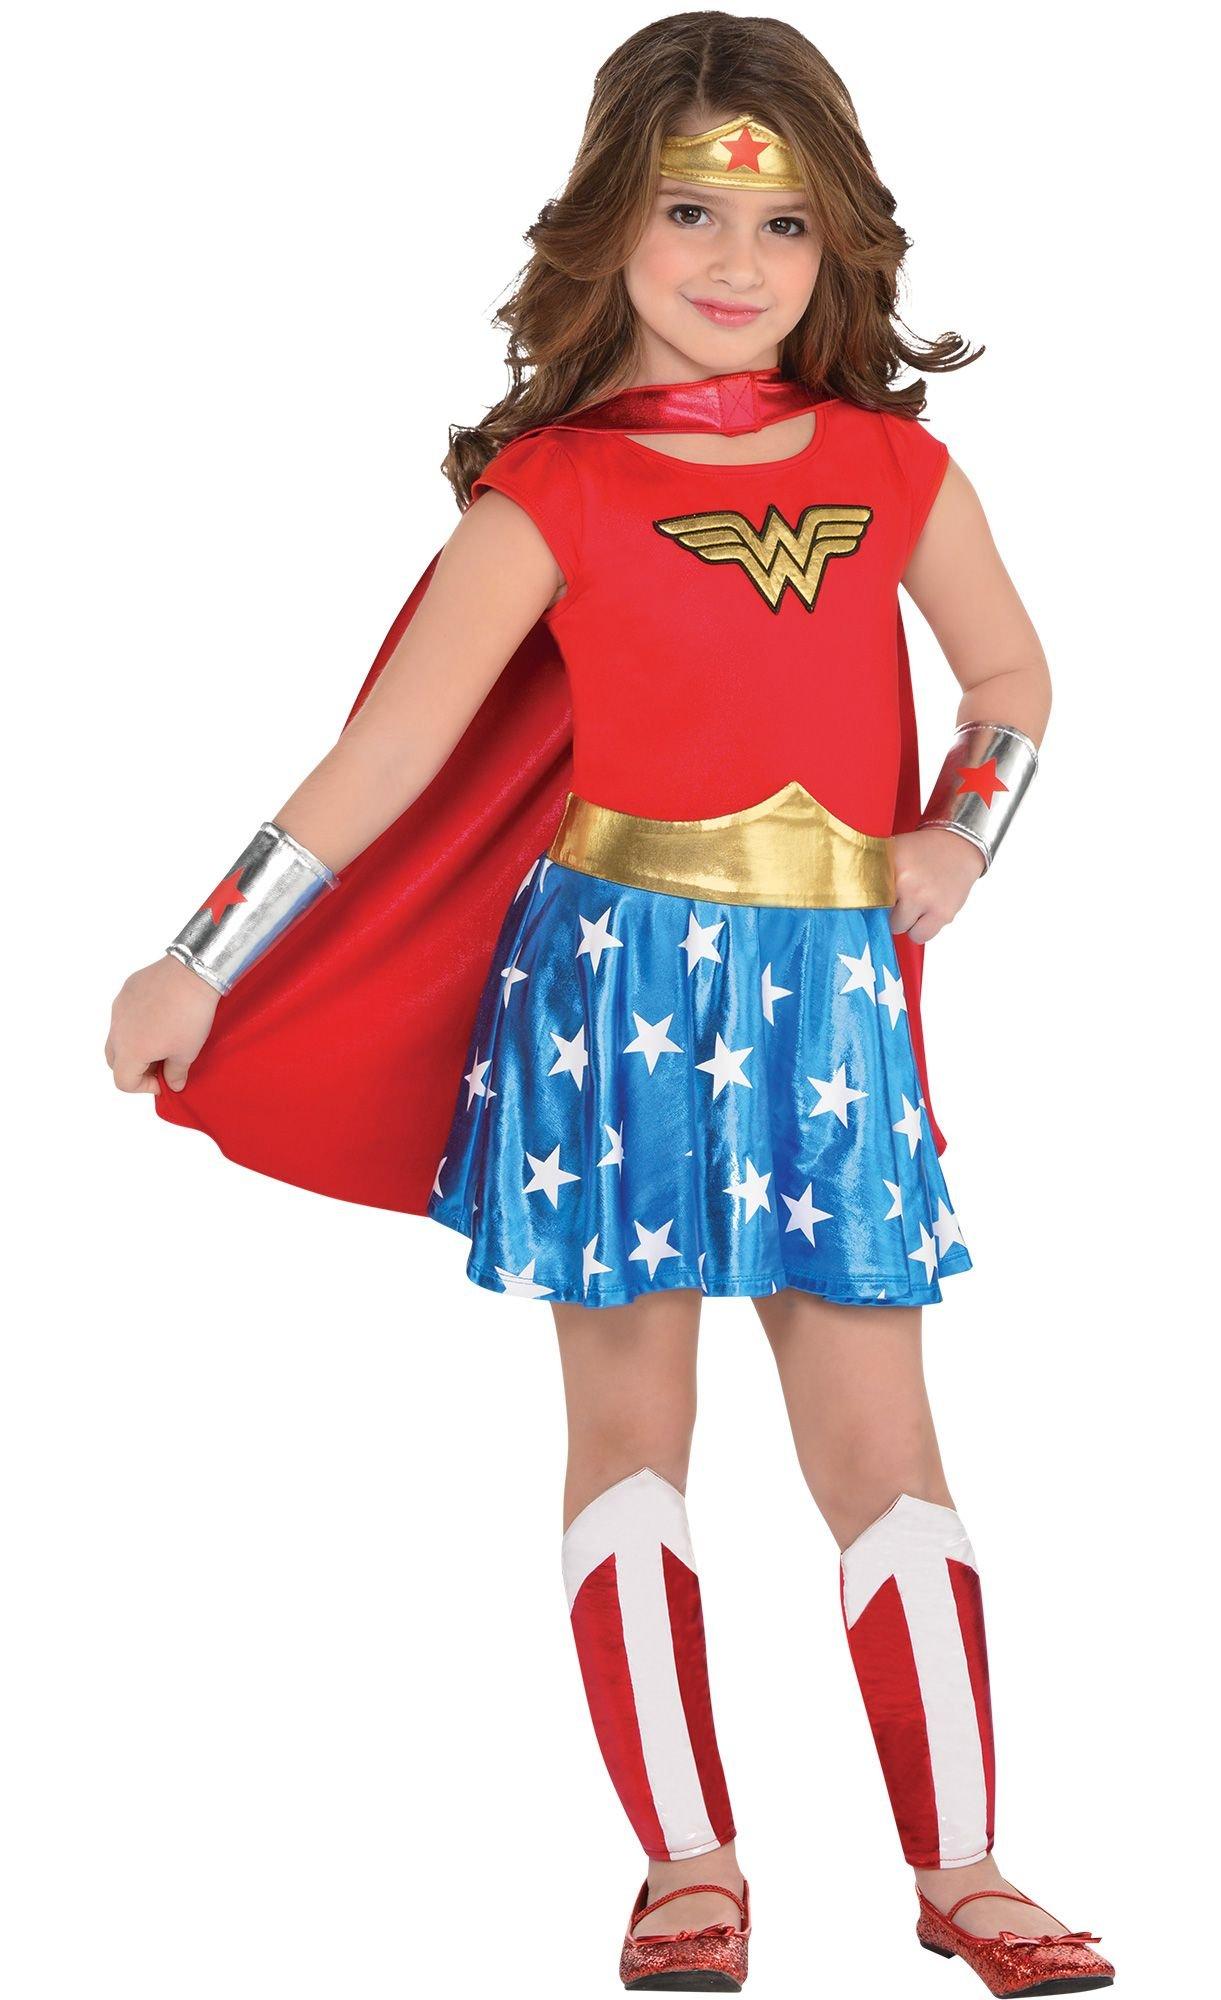 munching frugter London Toddlers' Wonder Woman Deluxe Costume | Party City